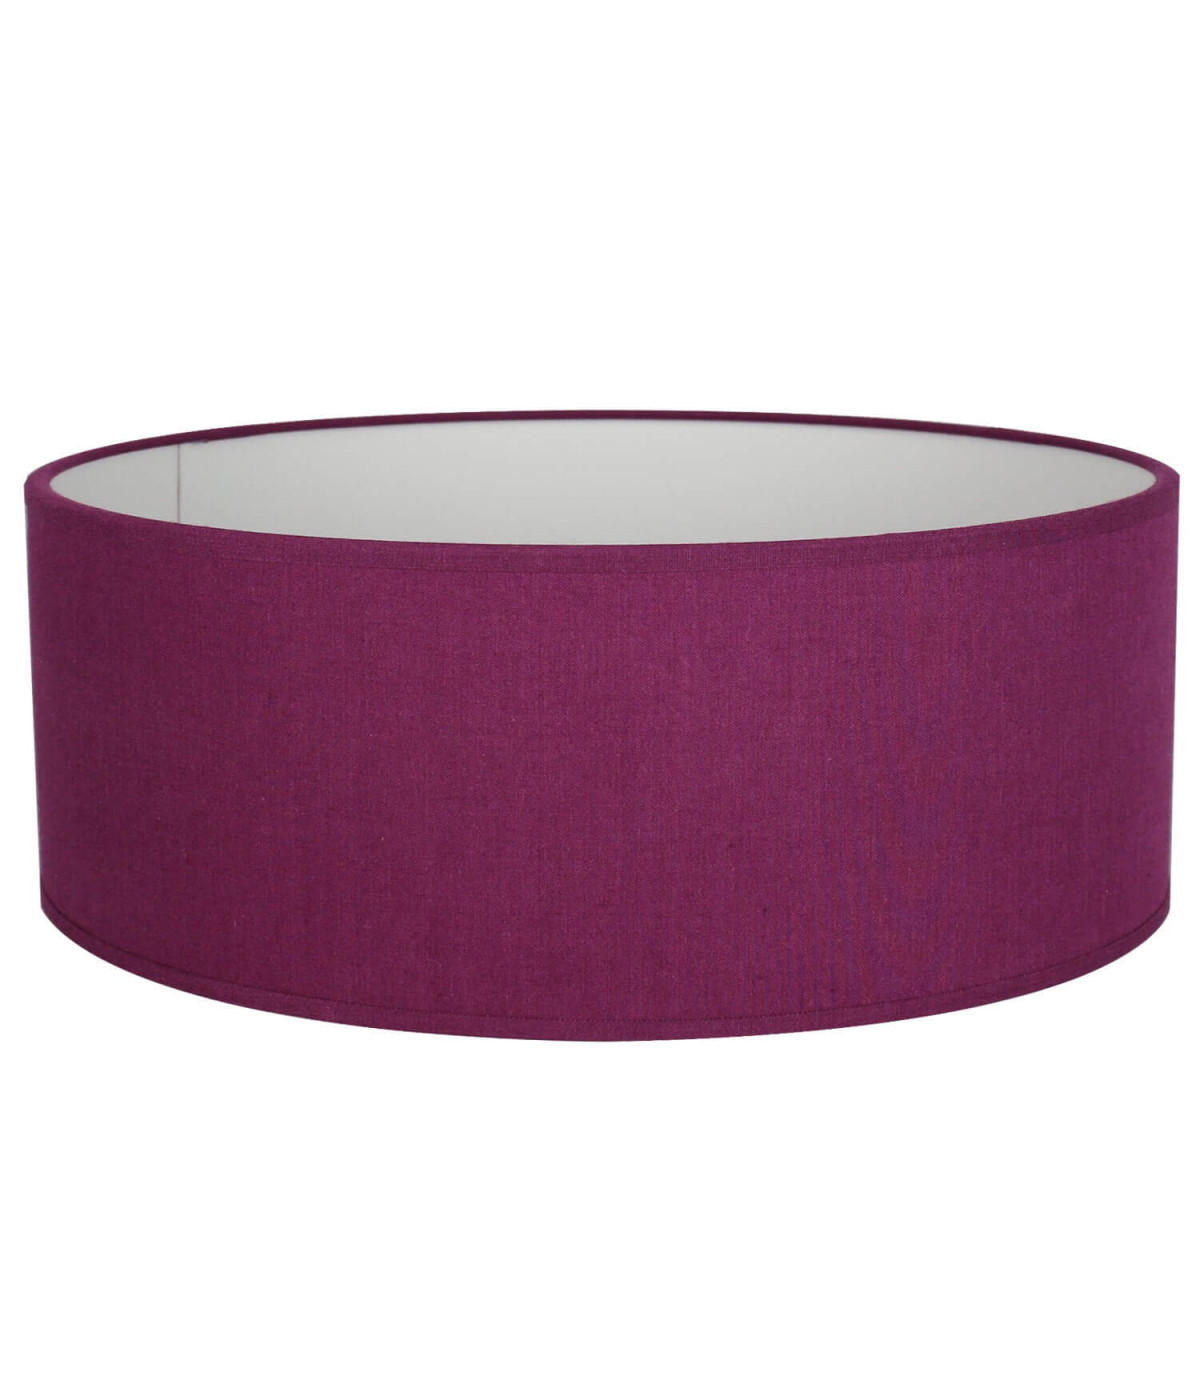 Oval Violet Lampshade